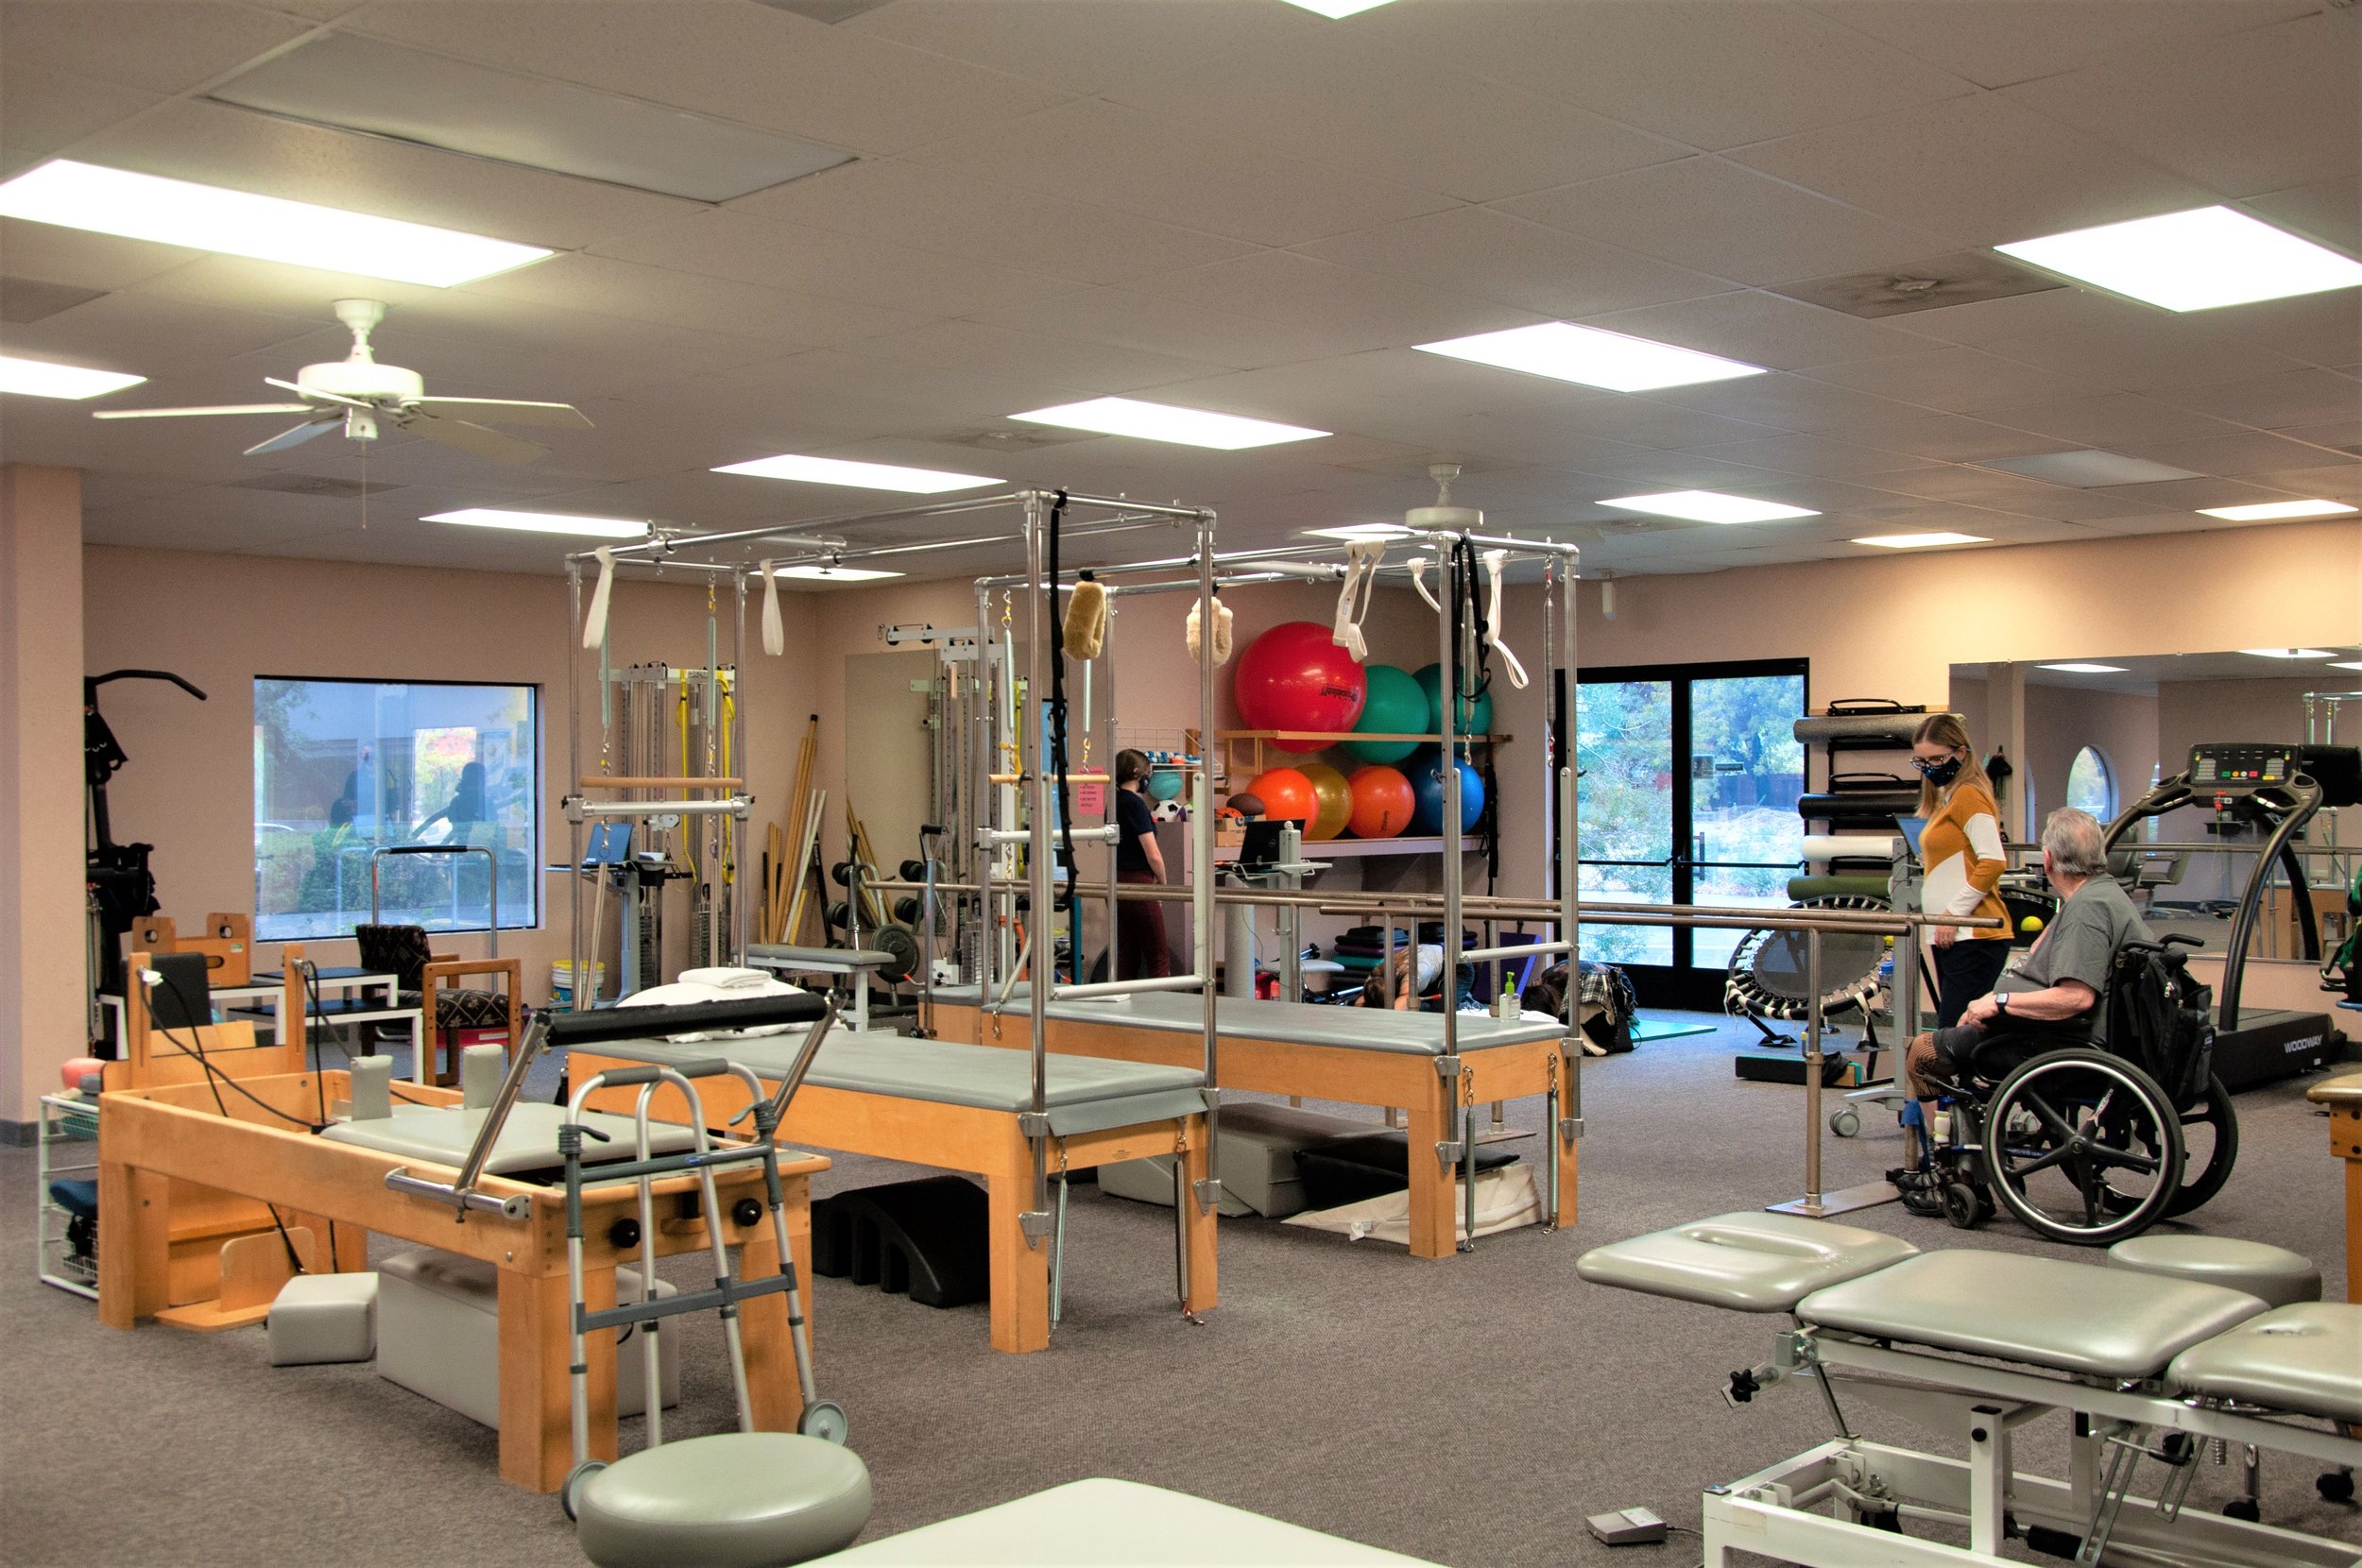 Facility - Gym overview.jpg